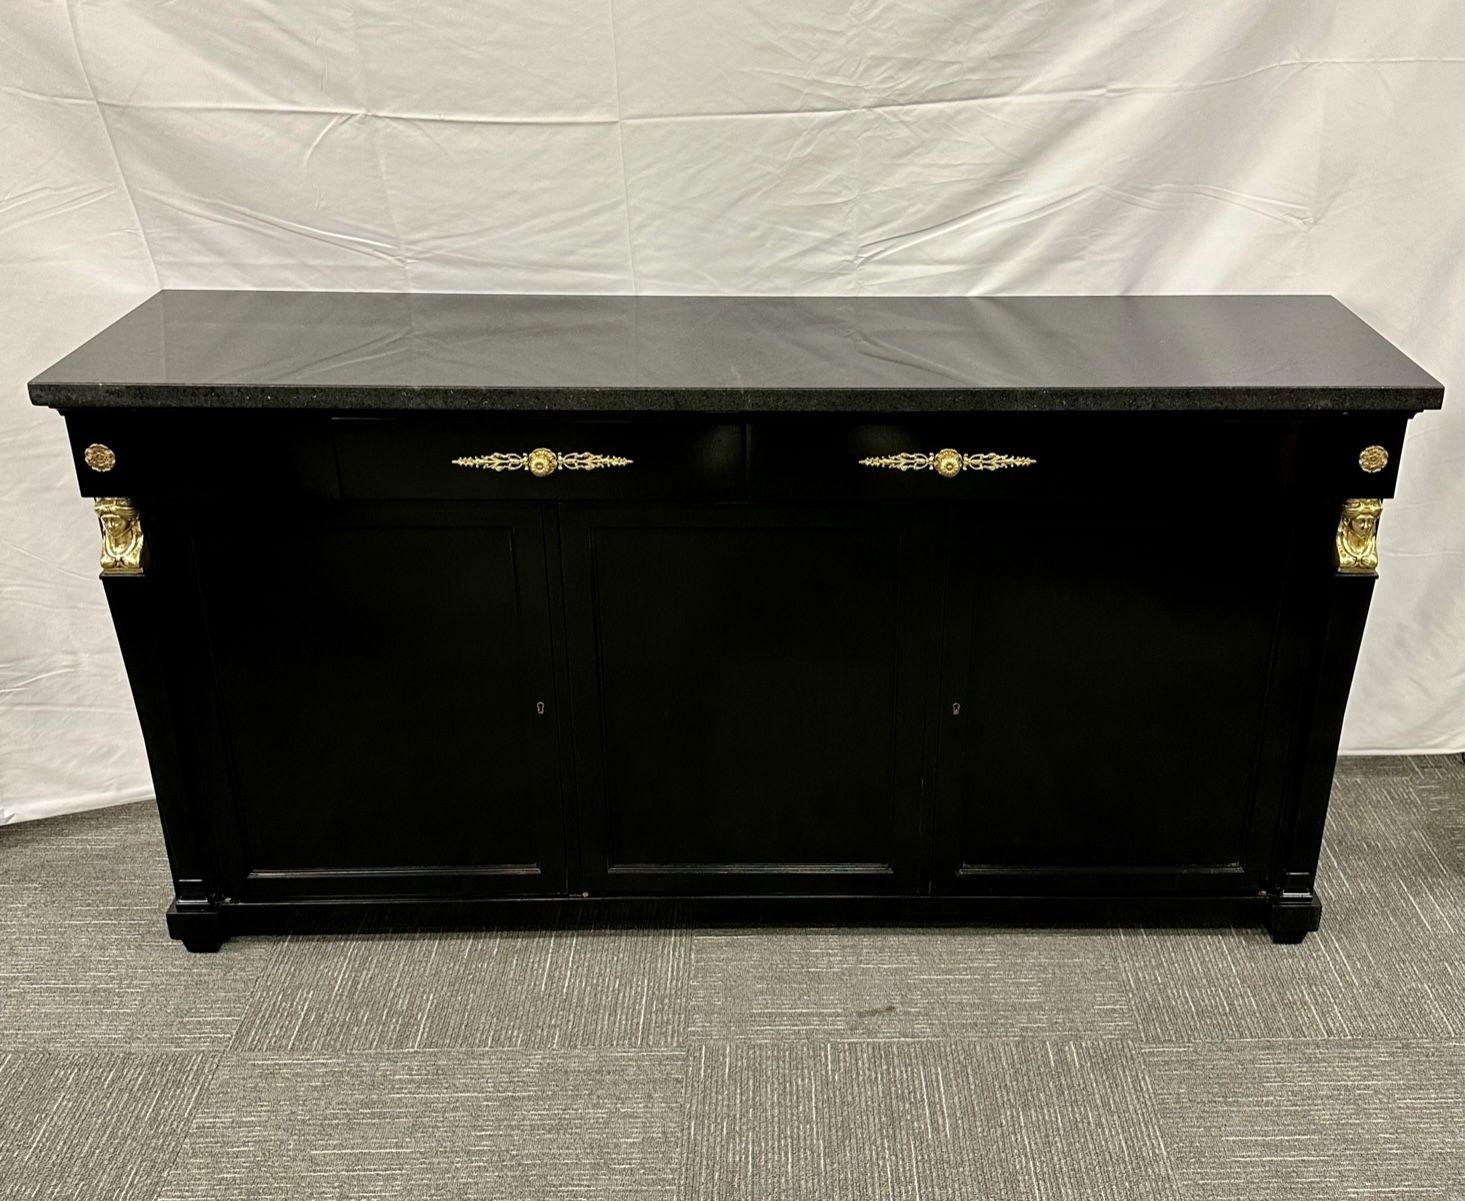 Hollywood Regency Sideboard / Credenza / Cabinet, Bronze Mounted, Empire Style
A black lacquered sideboard having two pull out drawers and three doors that open to a spacious drawer filled storage area. This work has two symmetrical bronze mounted